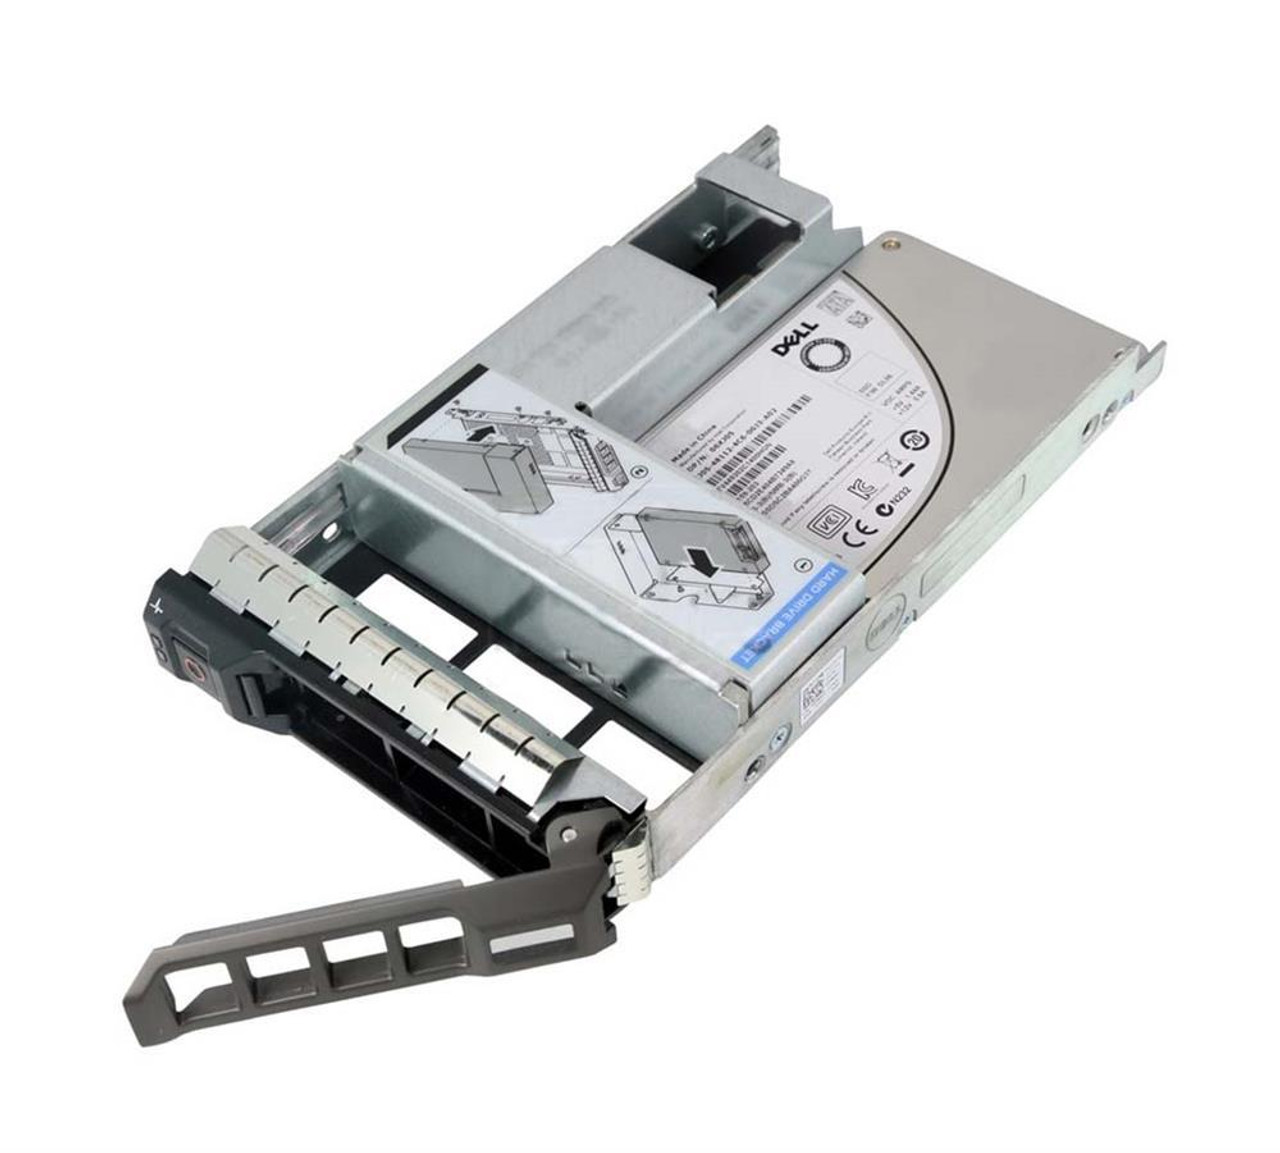 400-ATNR Dell 3.84TB MLC SAS 12Gbps Mixed Use 2.5-inch Internal Solid State Drive (SSD) with 3.5-inch Hybrid Carrier